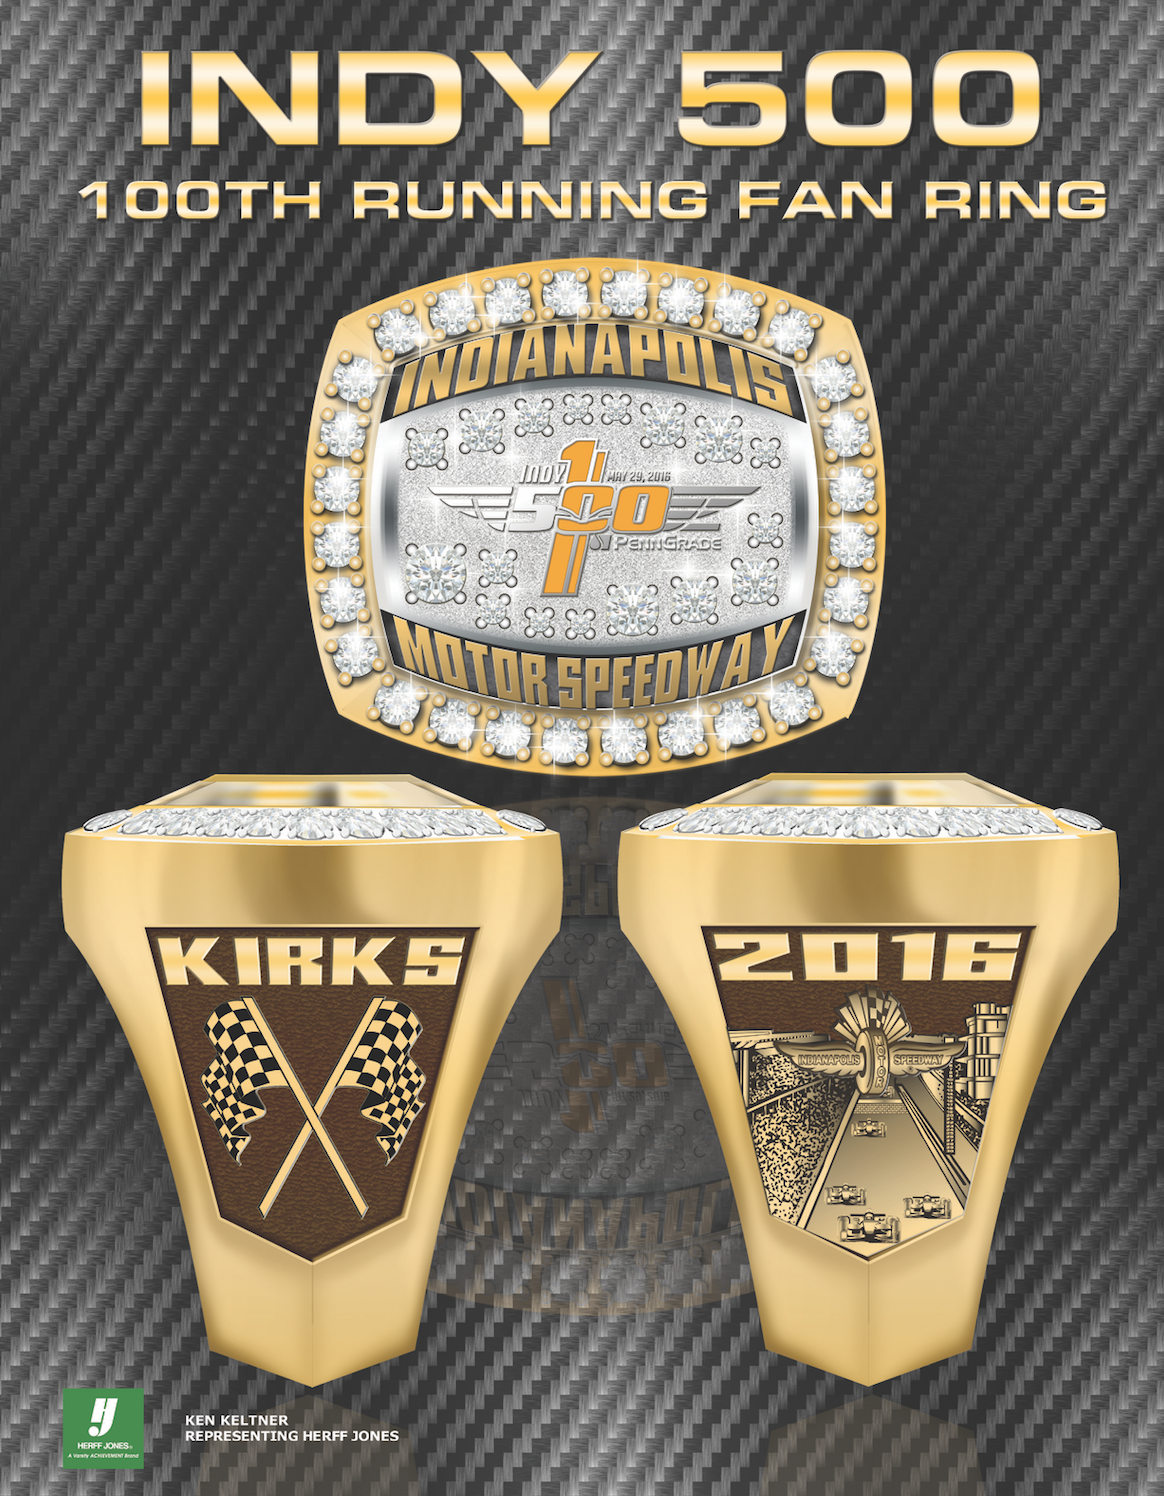 Indy 500 ring